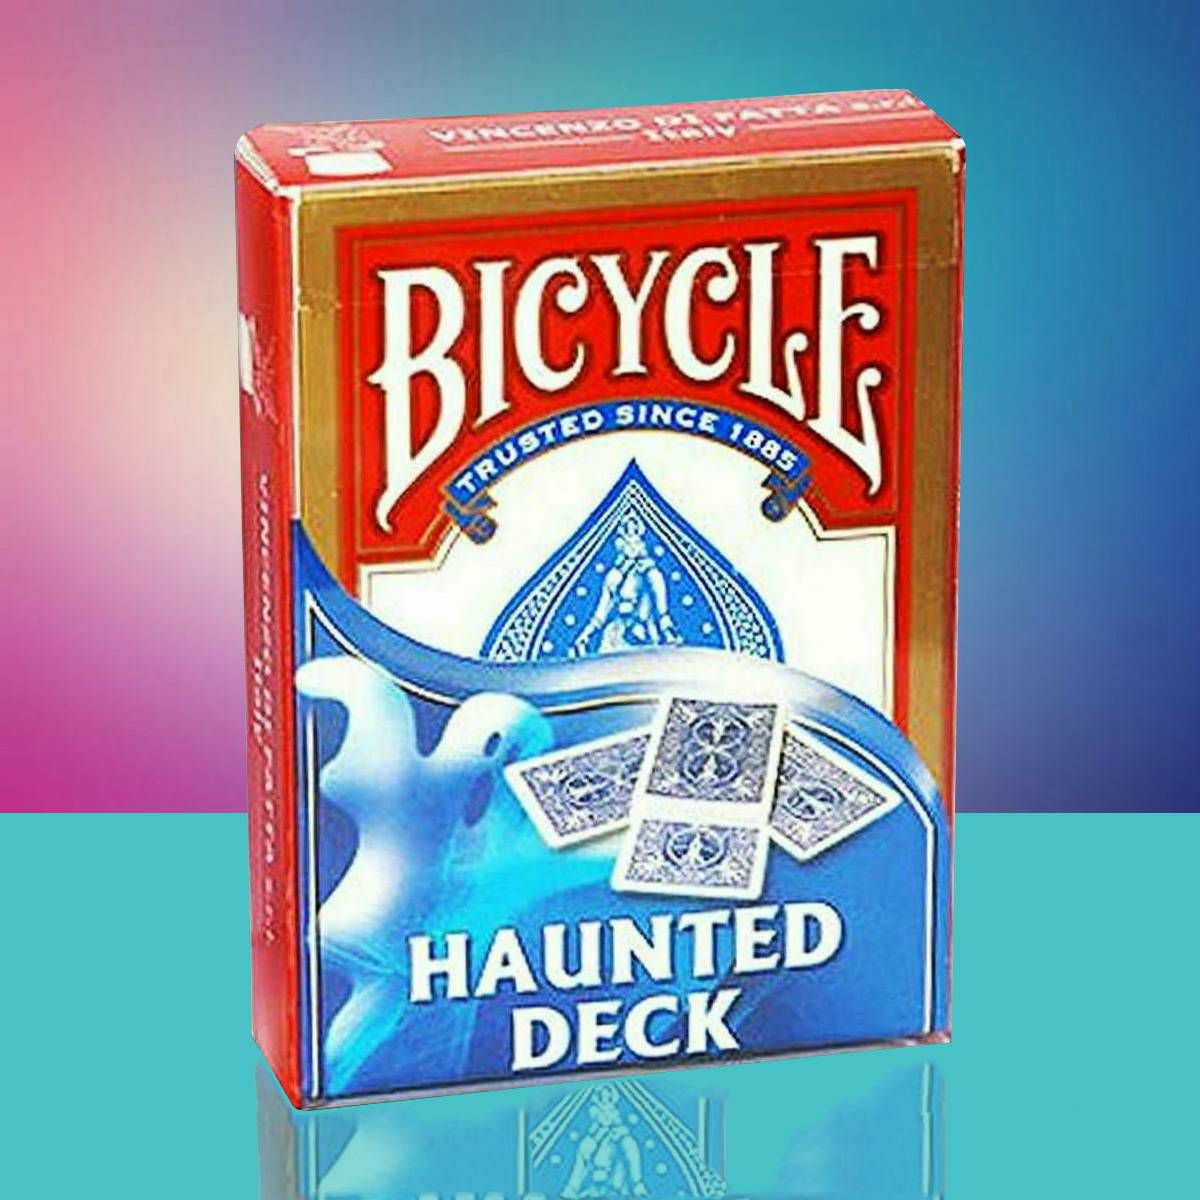 Bicycle Haunted Deck Red